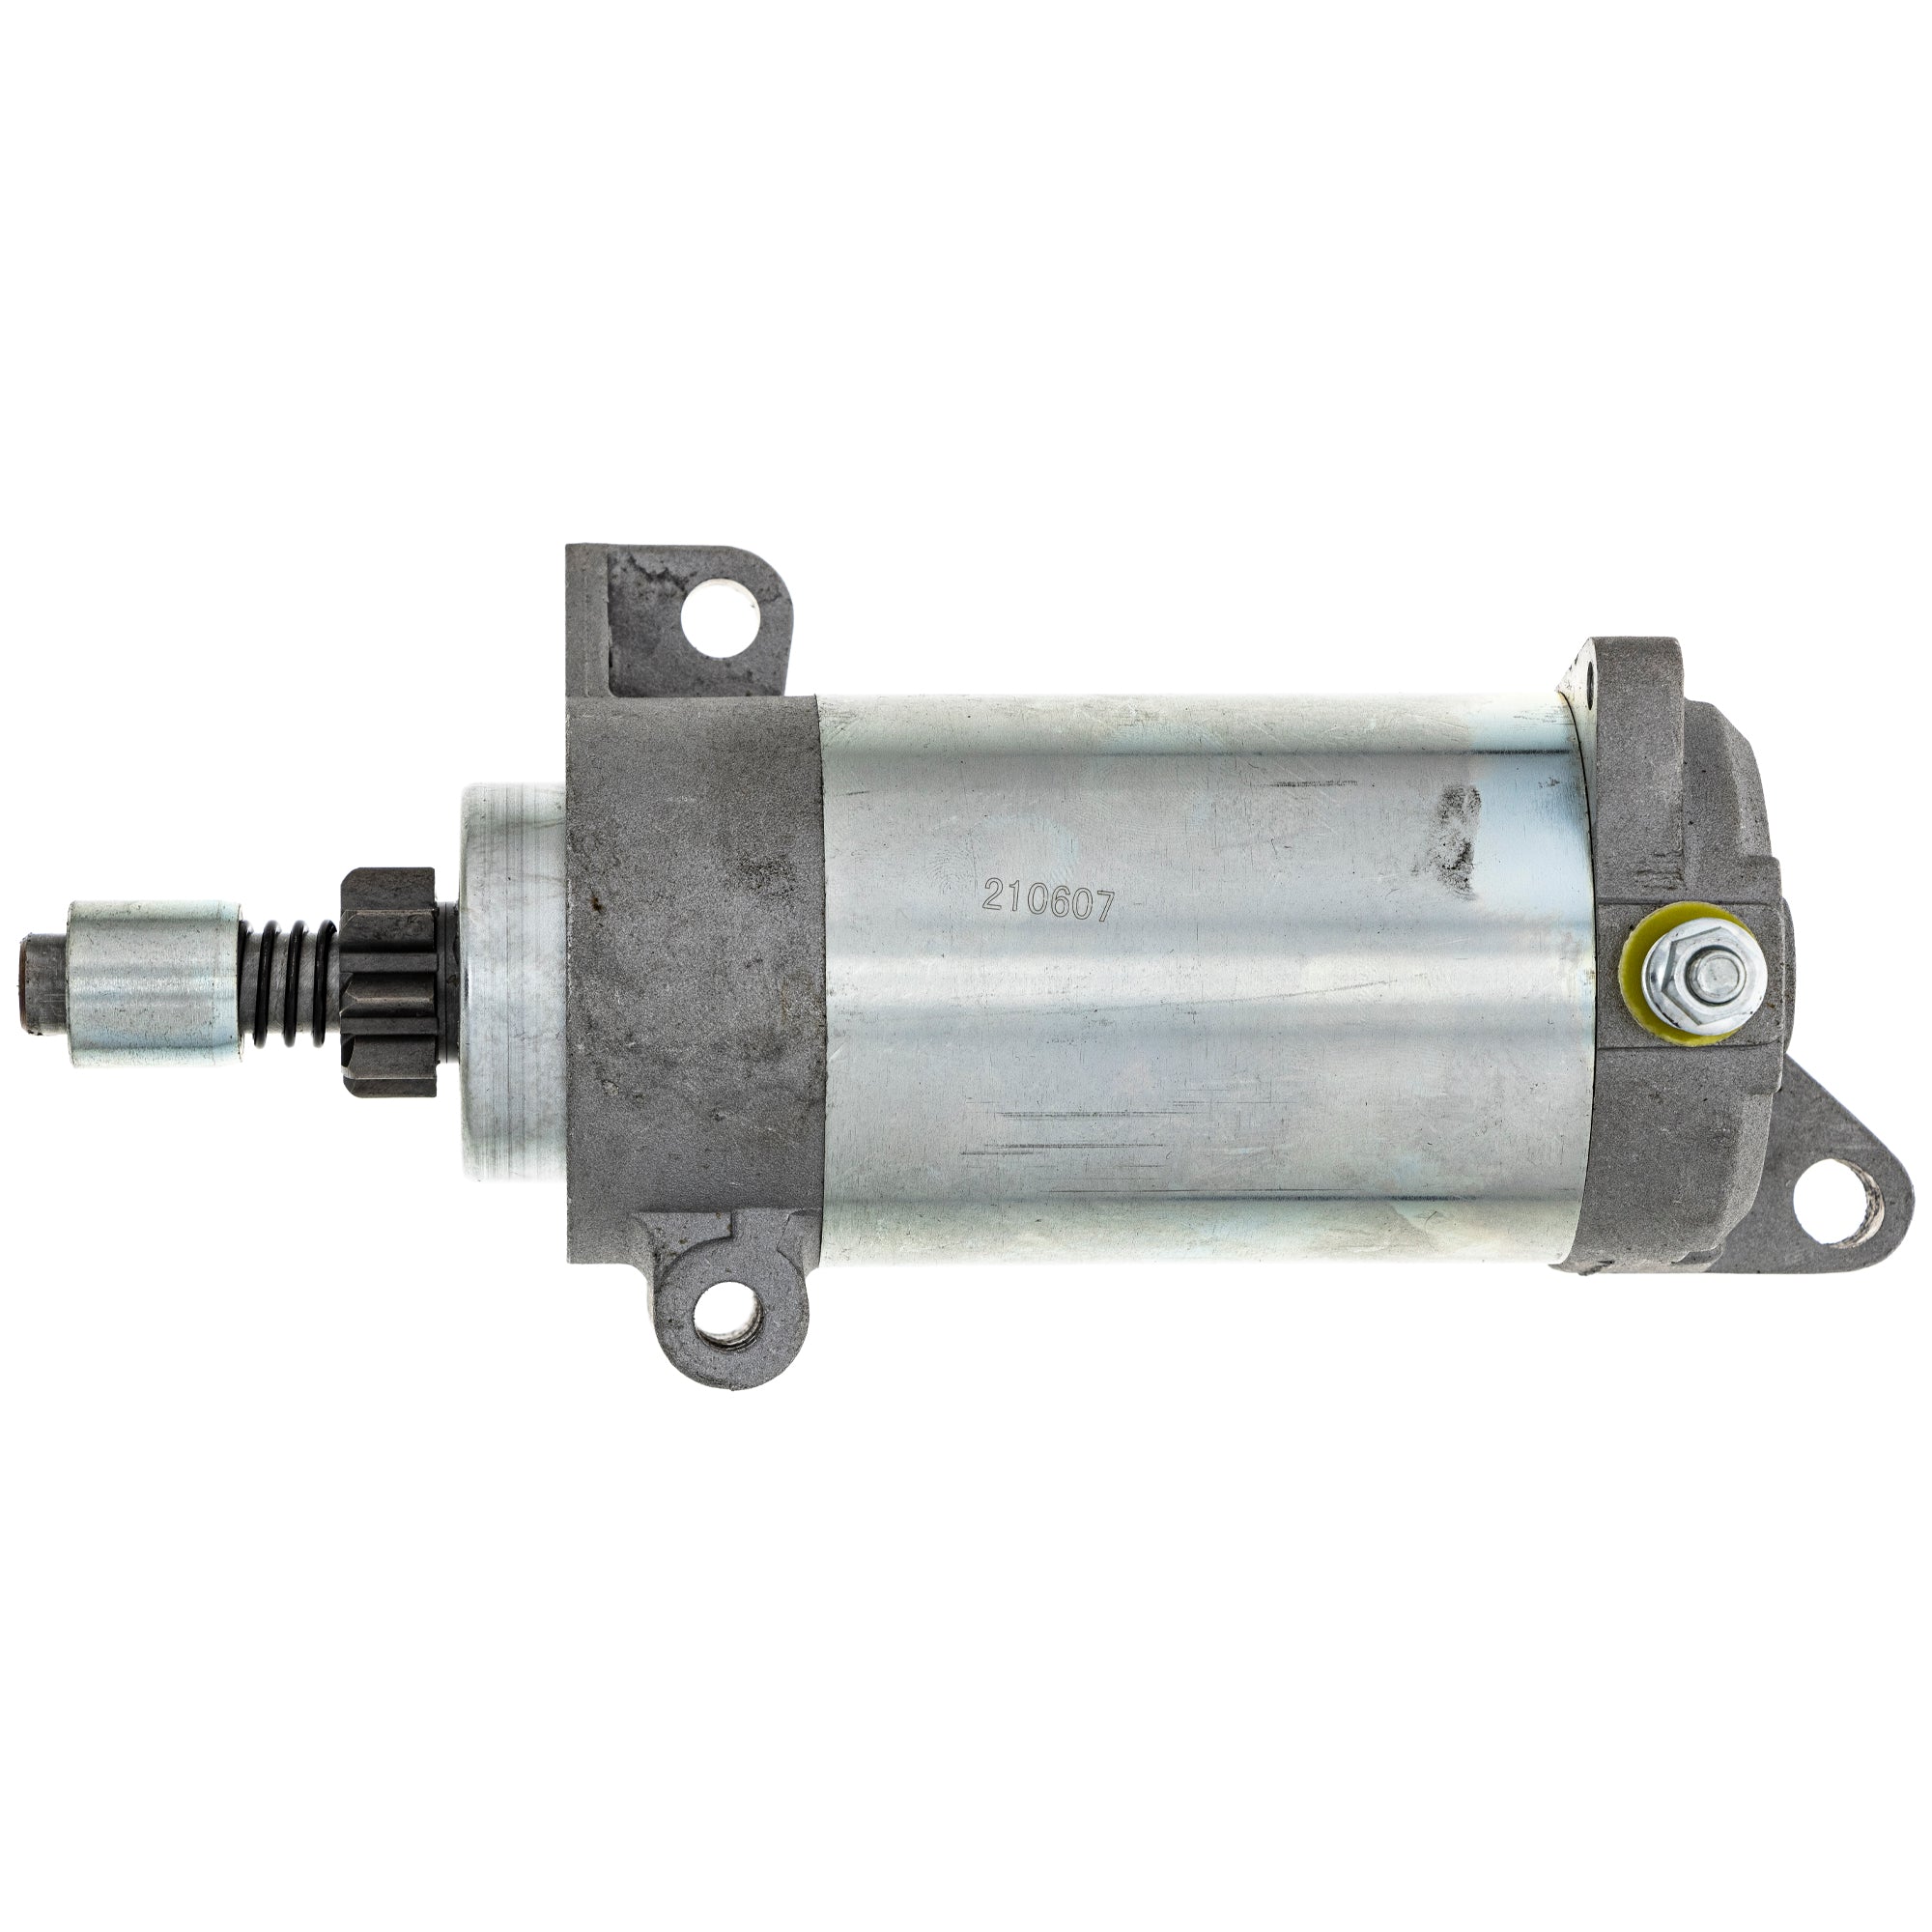 NICHE 519-CSM2367O Starter Motor Assembly for zOTHER BRP Can-Am